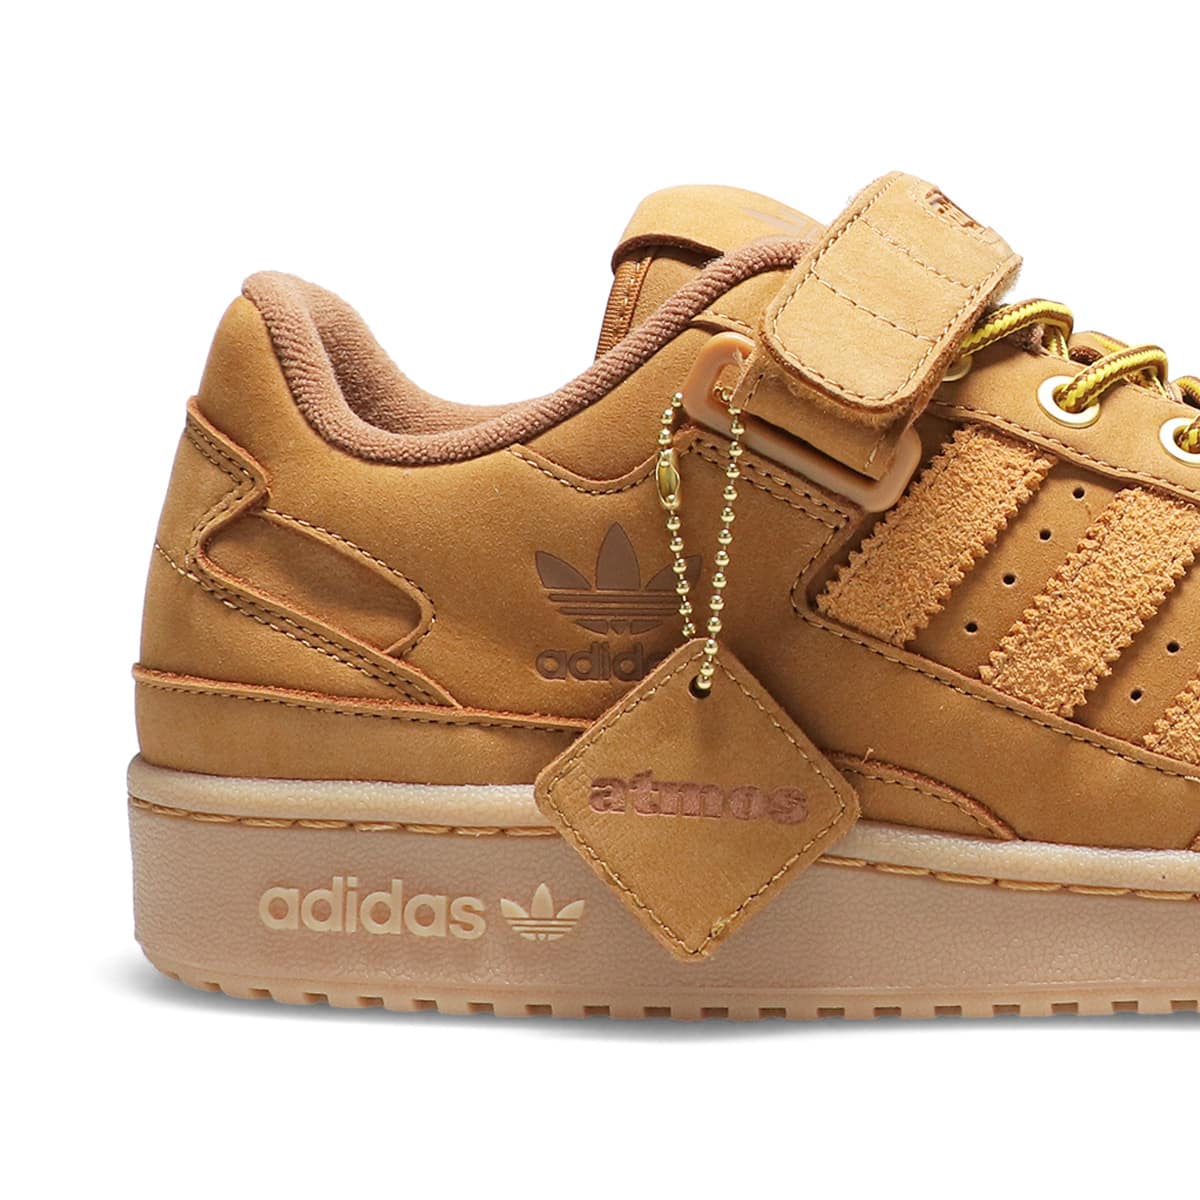 m&m's × adidas Forum Low "Yellow/Brown